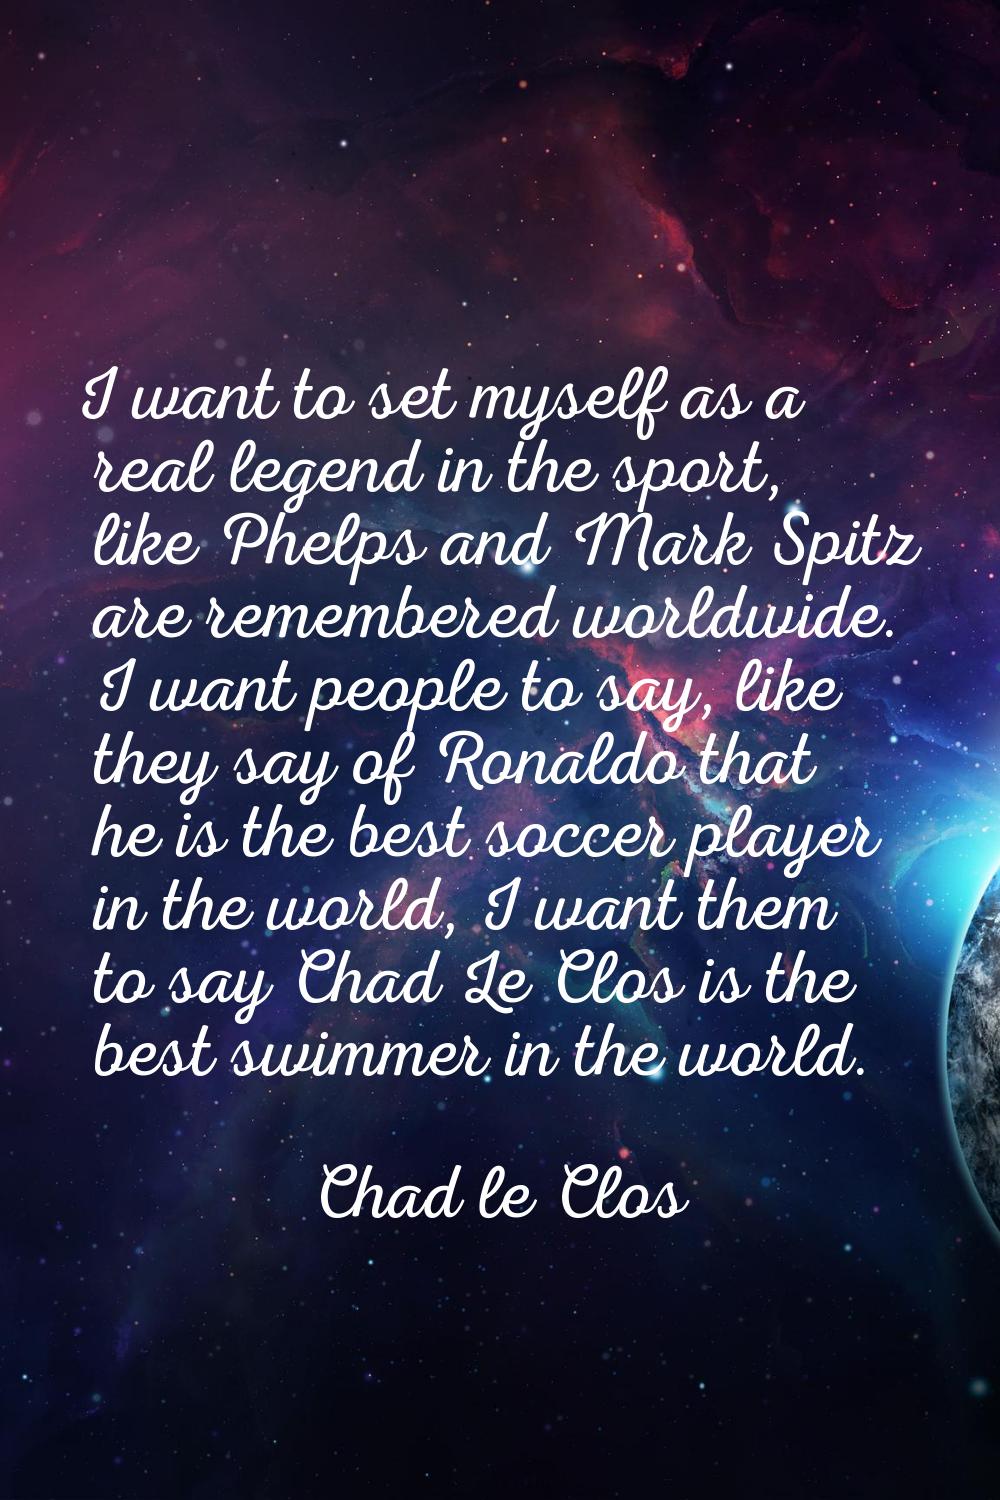 I want to set myself as a real legend in the sport, like Phelps and Mark Spitz are remembered world